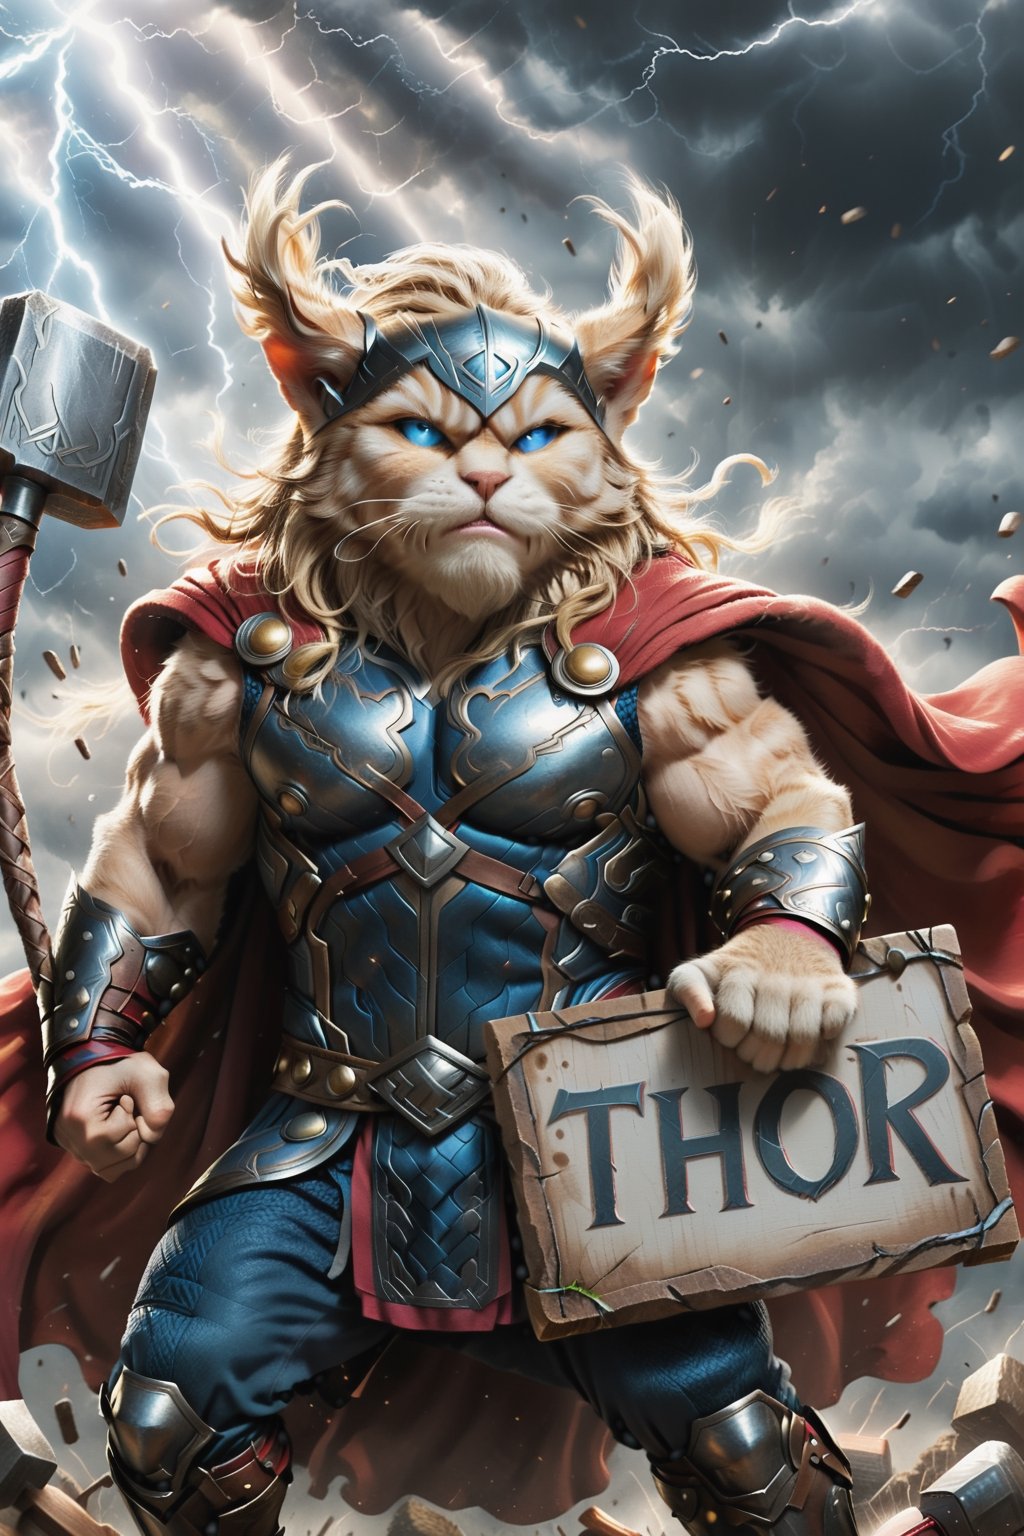 muscular cat blond hair and large )), (powerful cat in the form of the mythical god Thor, the god of thunder.), (((holding a sign with the text: "THOR"))), action-packed background